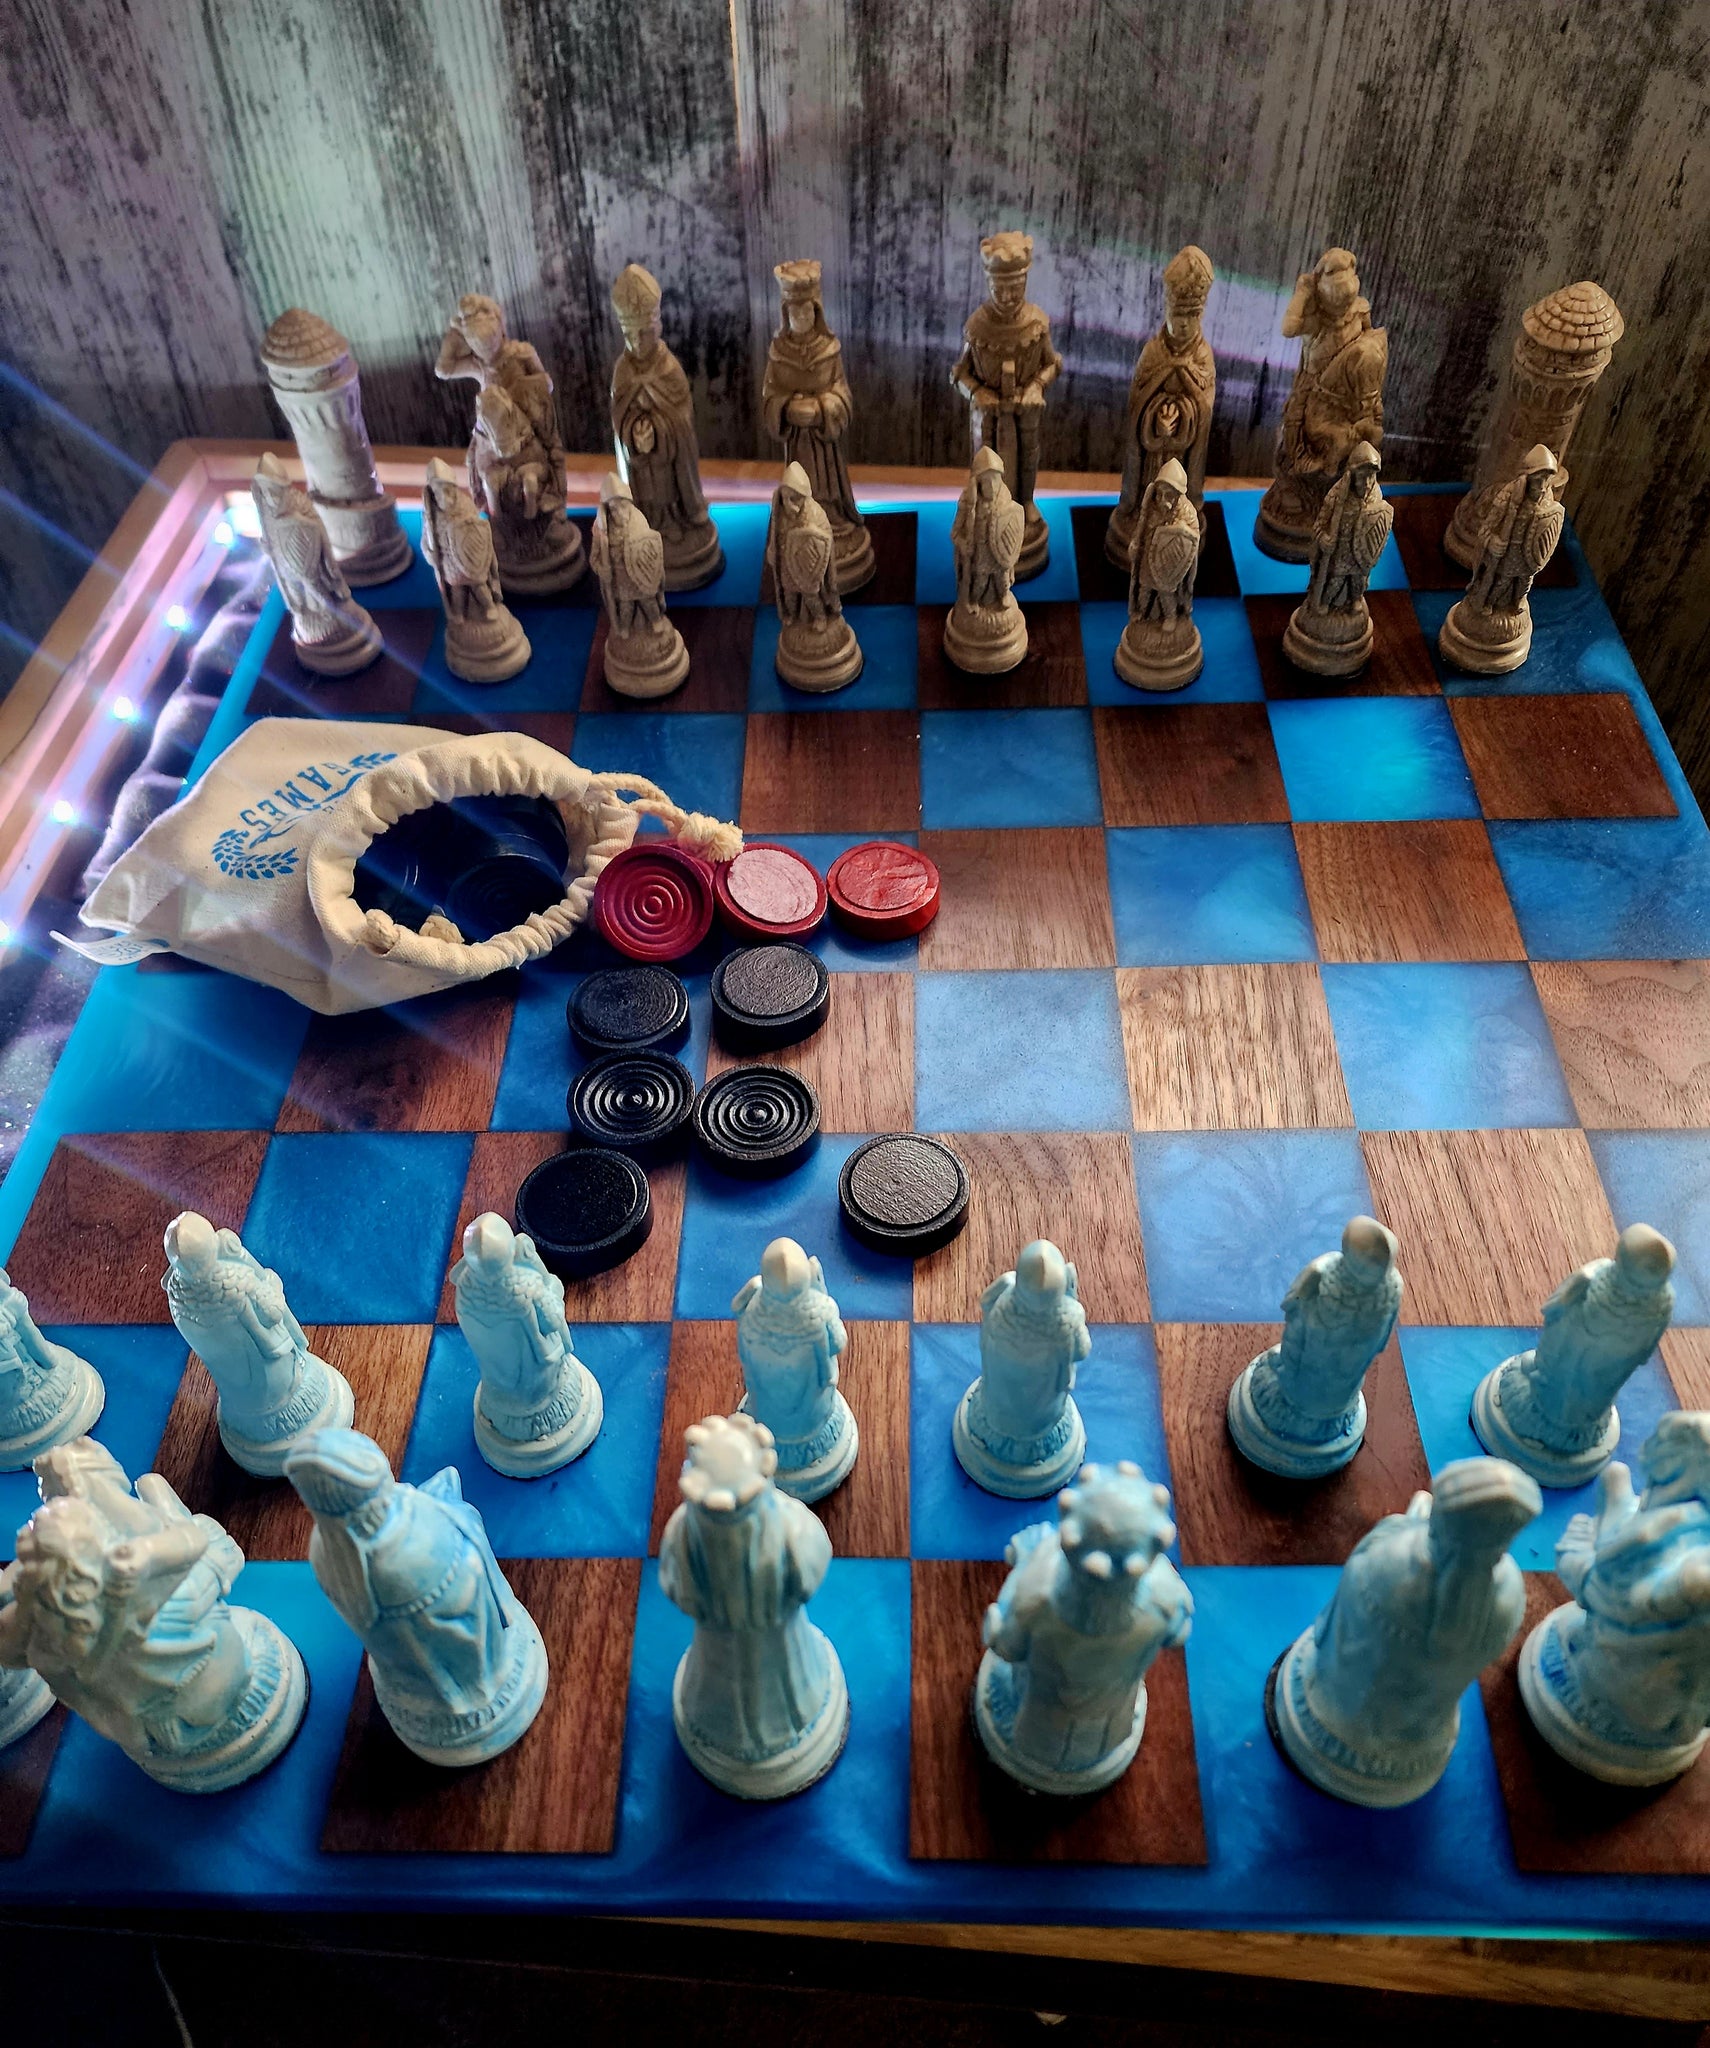 Compass Leaning Against Chess Piece With Other Chess Pieces In